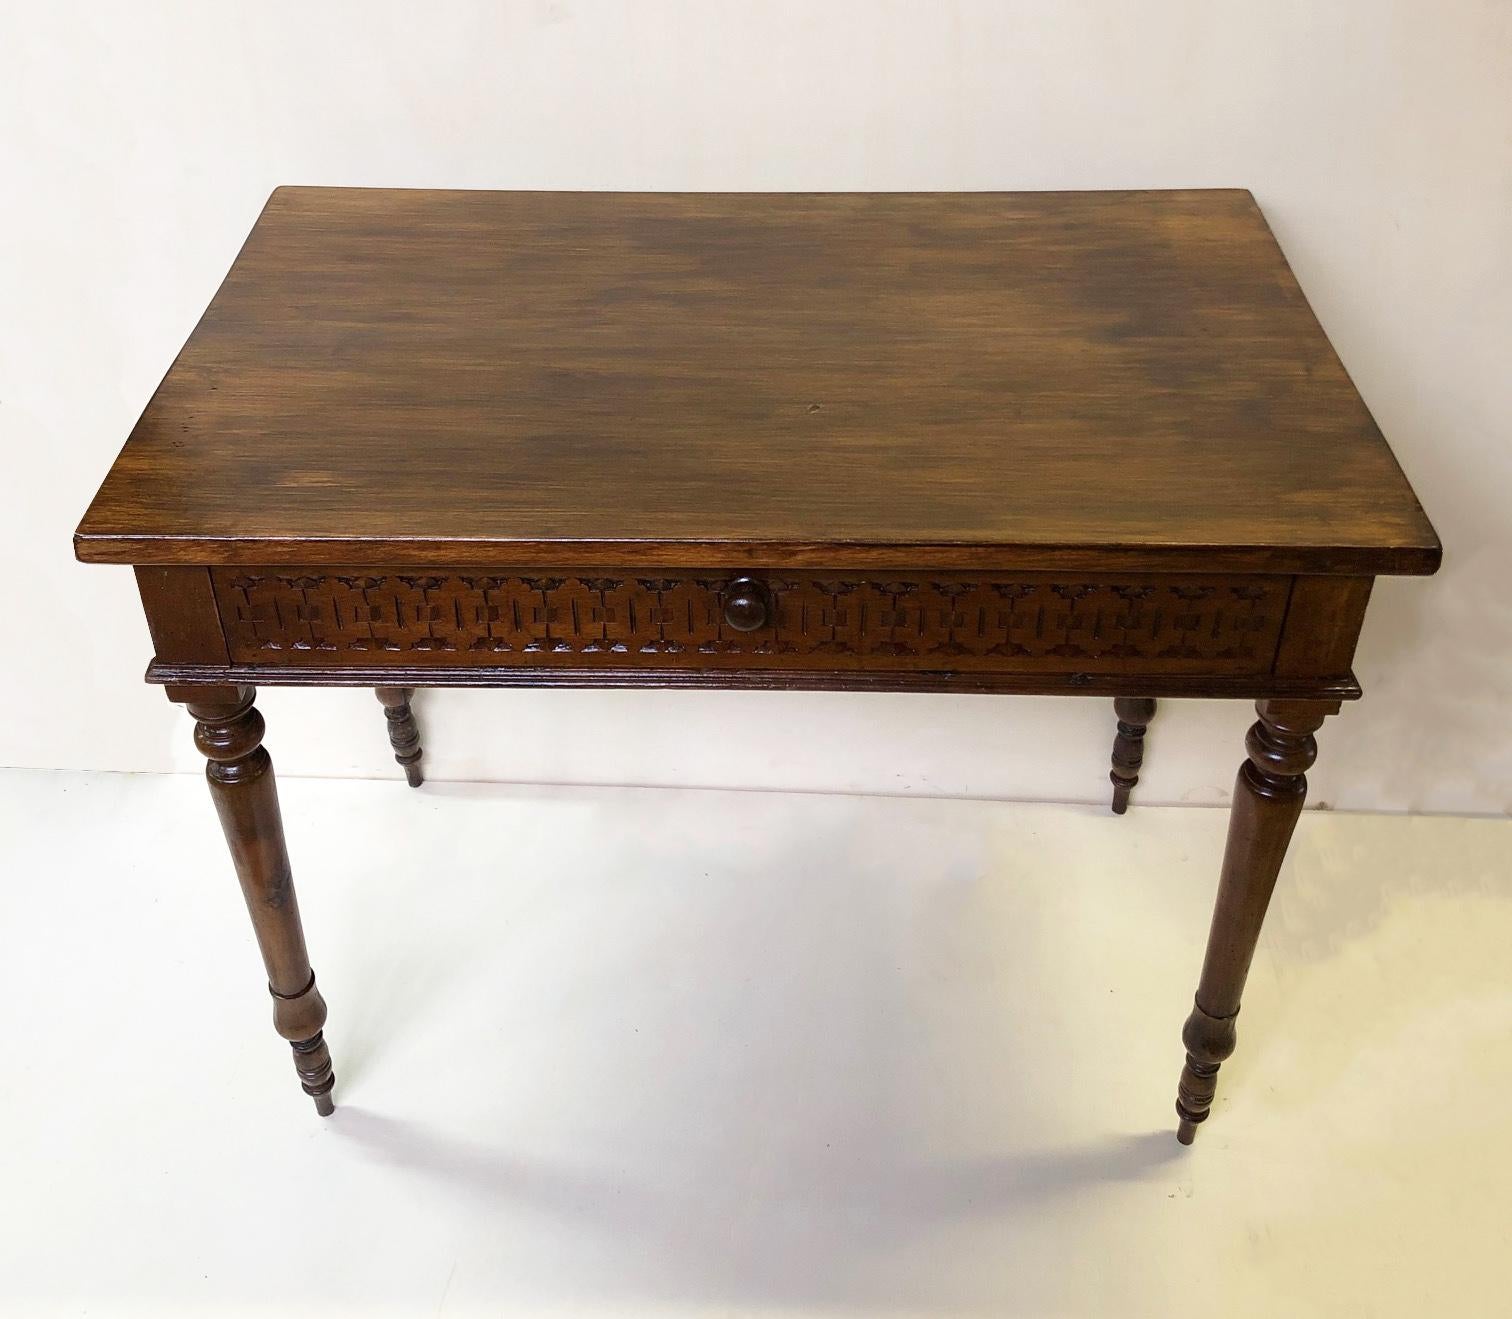 Original Italian desk table in walnut with perimeter carvings from 1880, more recent top, very large drawer.
The transport quote for the USA and Canada is customized according to the destination, make the request with zip code and city.